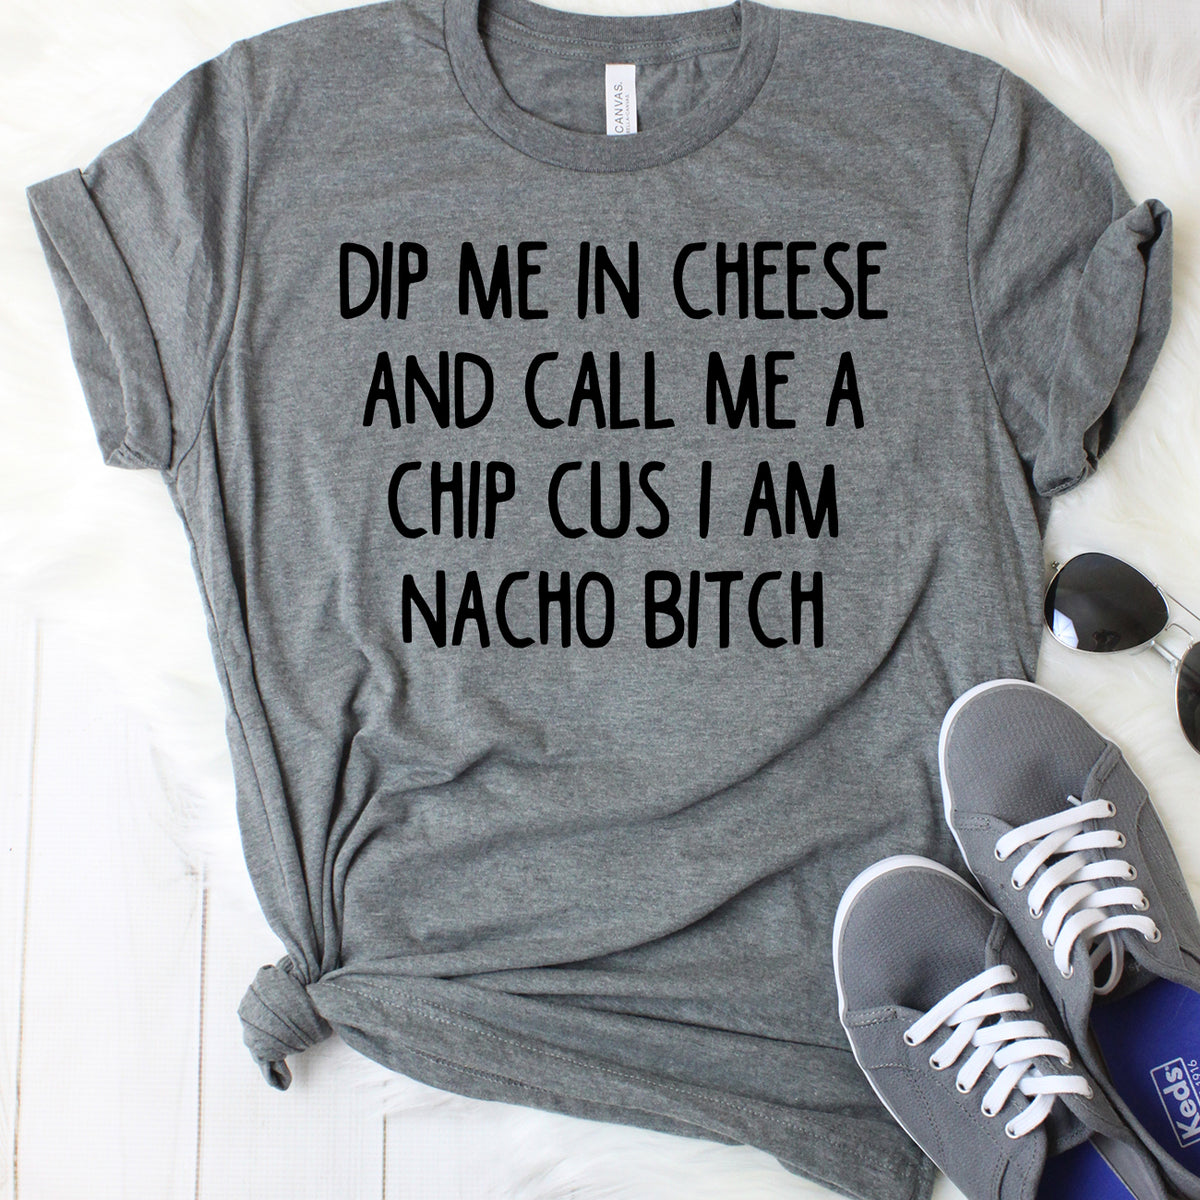 Dip Me in Cheese and Call Me a Chip Cus I am Nacho Bitch T-Shirt